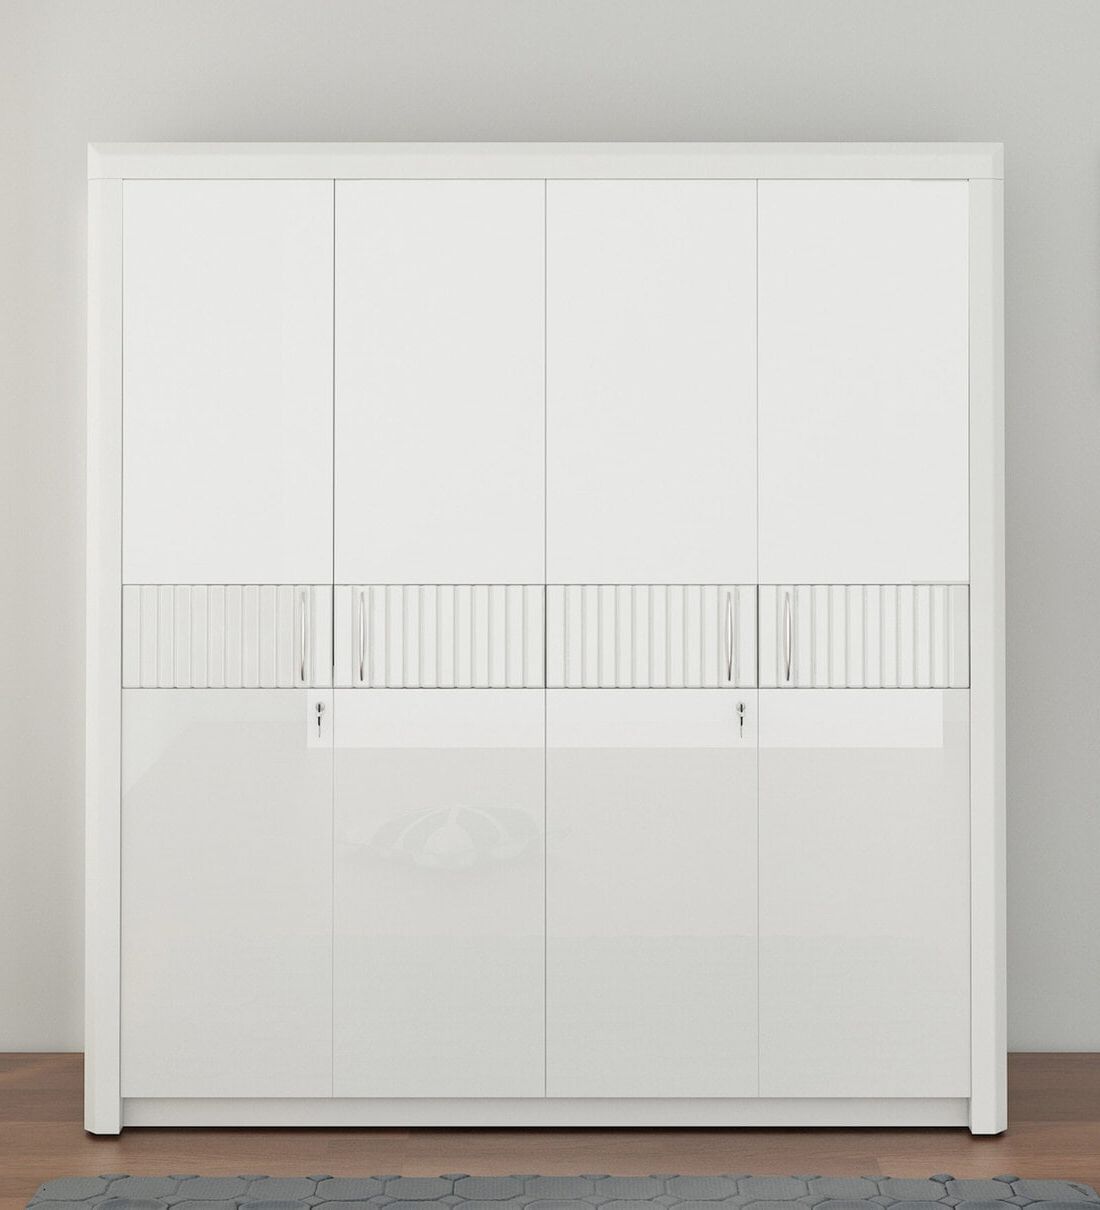 [%buy Kosmo Arctic 4 Door Wardrobe In High Gloss White Finish At 31% Off Spacewood | Pepperfry Inside Best And Newest Arctic White Wardrobes|arctic White Wardrobes With Regard To Most Up To Date Buy Kosmo Arctic 4 Door Wardrobe In High Gloss White Finish At 31% Off Spacewood | Pepperfry|2017 Arctic White Wardrobes Regarding Buy Kosmo Arctic 4 Door Wardrobe In High Gloss White Finish At 31% Off Spacewood | Pepperfry|favorite Buy Kosmo Arctic 4 Door Wardrobe In High Gloss White Finish At 31% Off Spacewood | Pepperfry Regarding Arctic White Wardrobes%] (View 10 of 10)